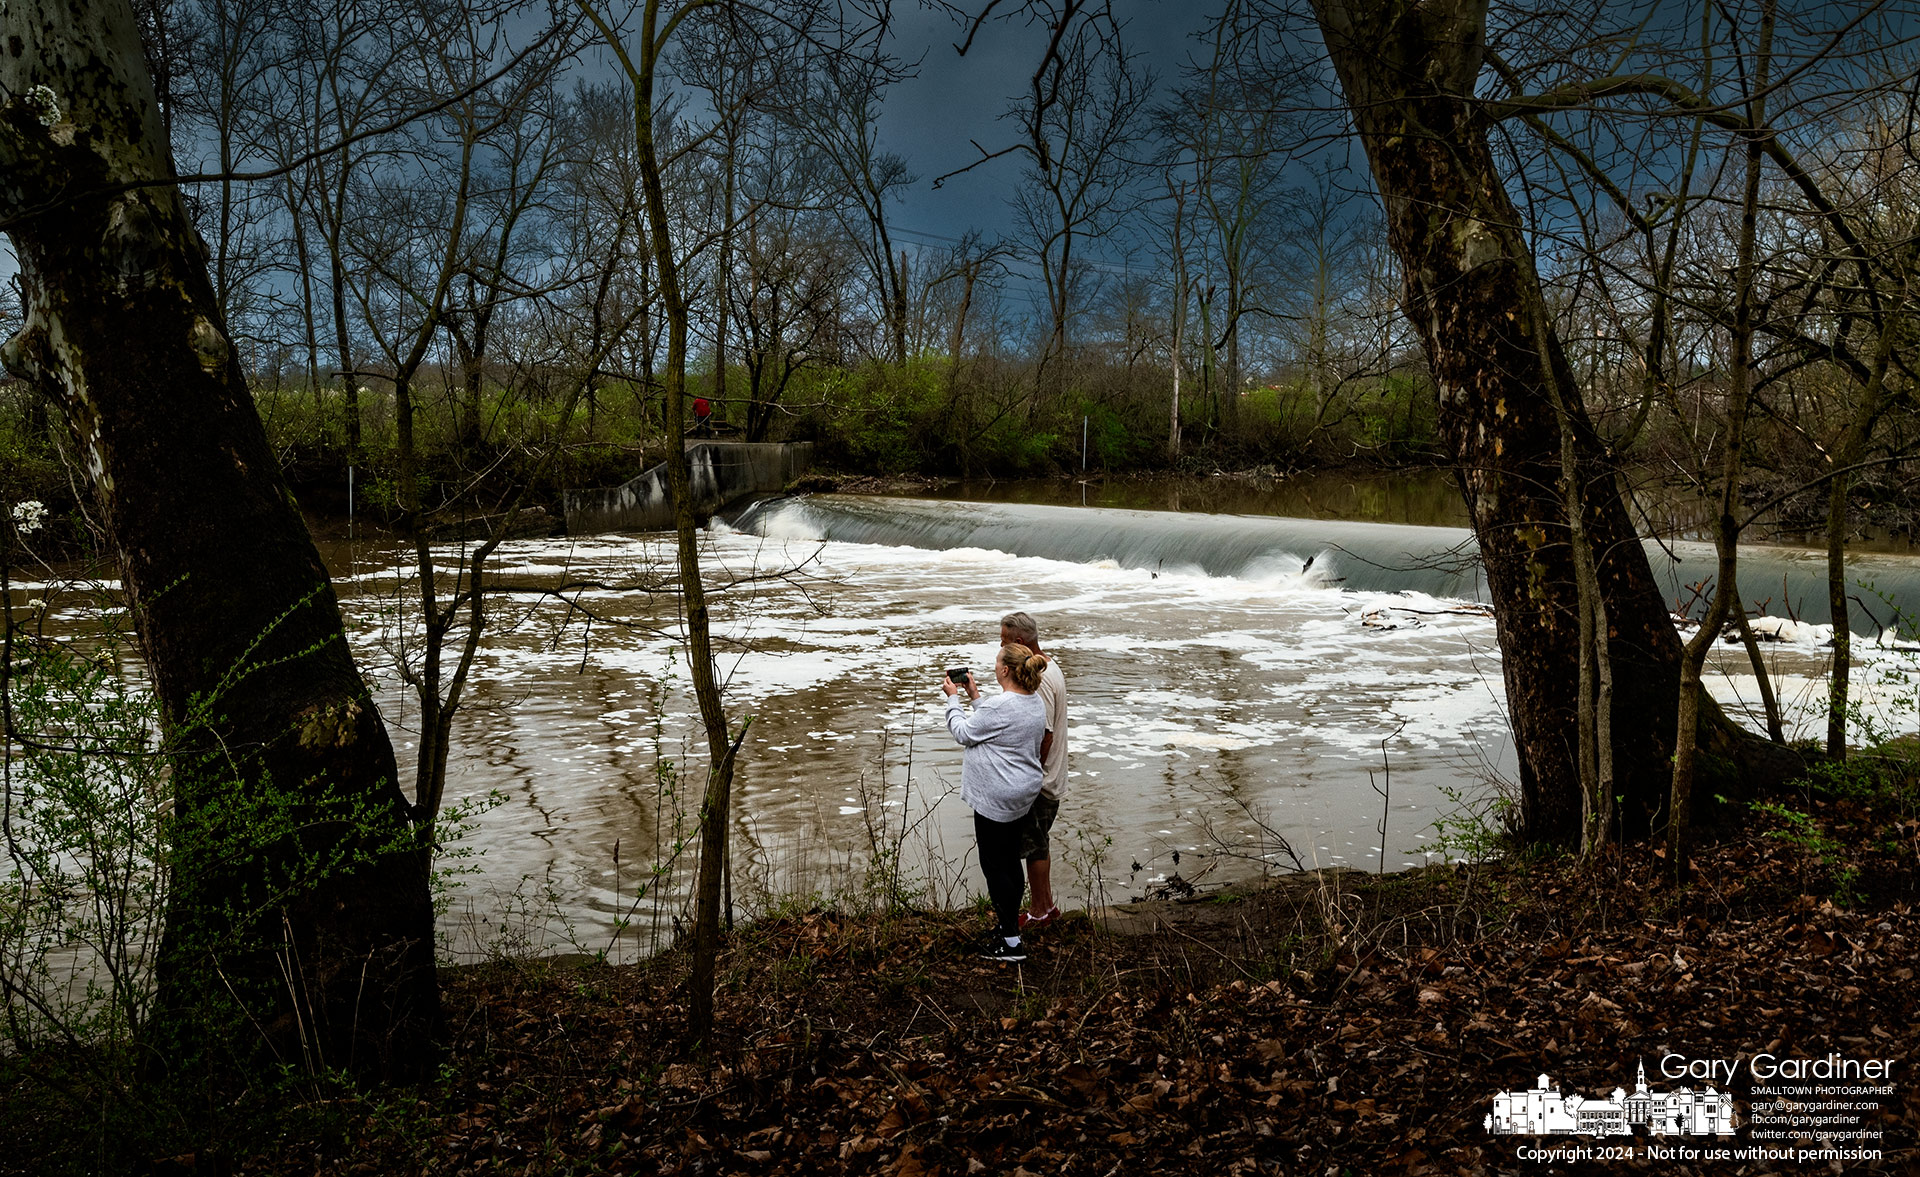 A couple watches a blue heron fish the rapid waters flowing over the Alum Creek North low-head dam after several days of rain raised the creek's level as more storms approached. My Final Photo for April 2, 2024.